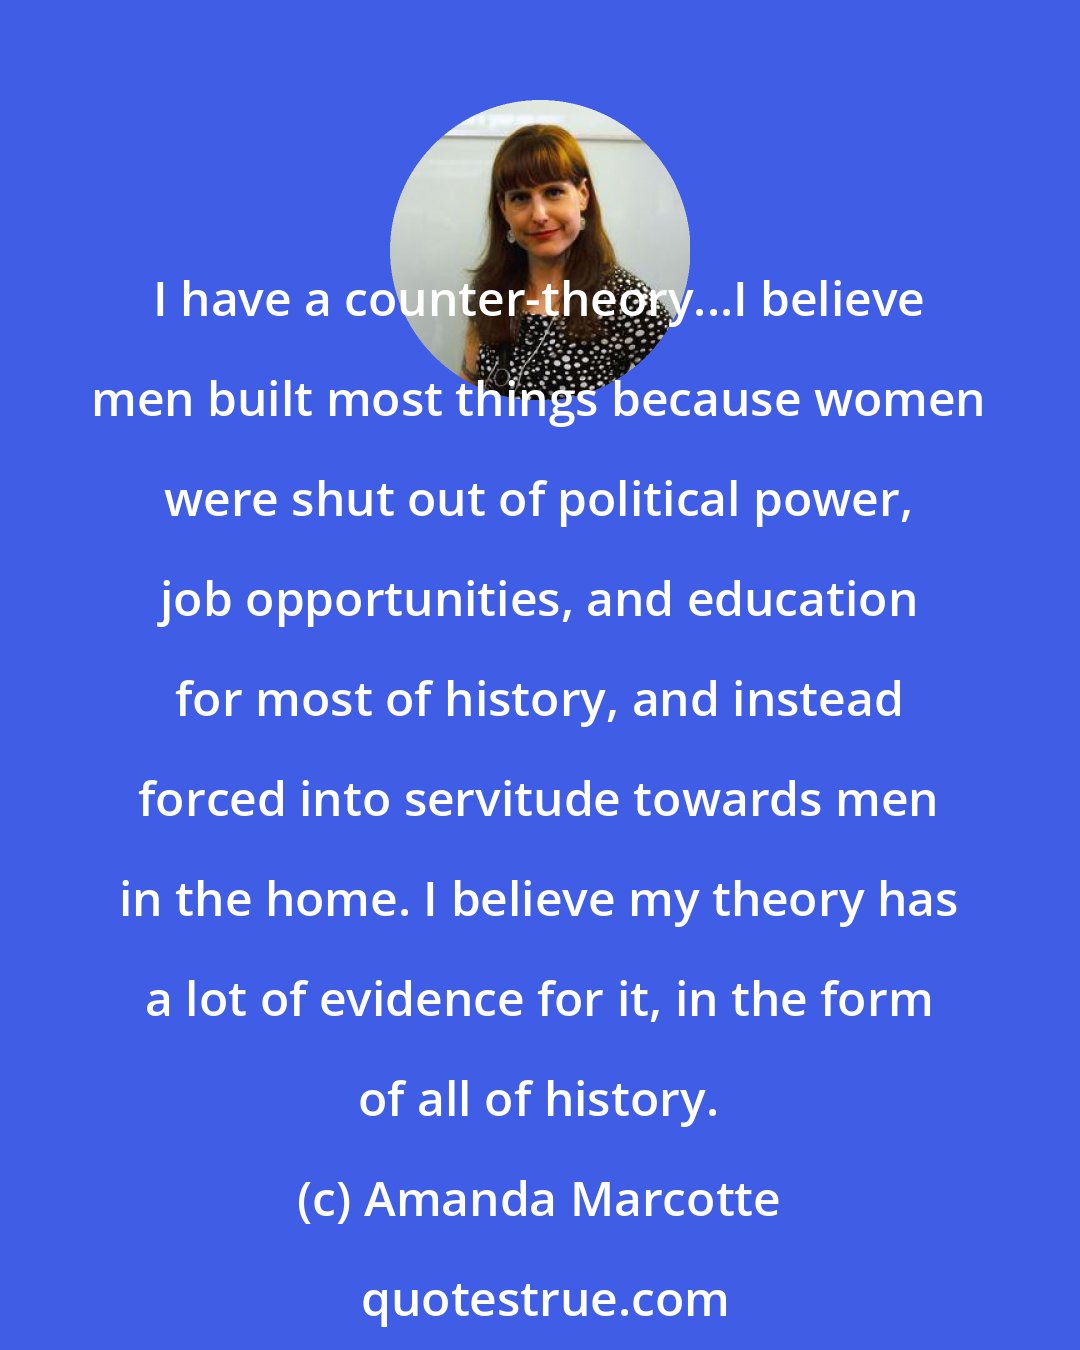 Amanda Marcotte: I have a counter-theory...I believe men built most things because women were shut out of political power, job opportunities, and education for most of history, and instead forced into servitude towards men in the home. I believe my theory has a lot of evidence for it, in the form of all of history.